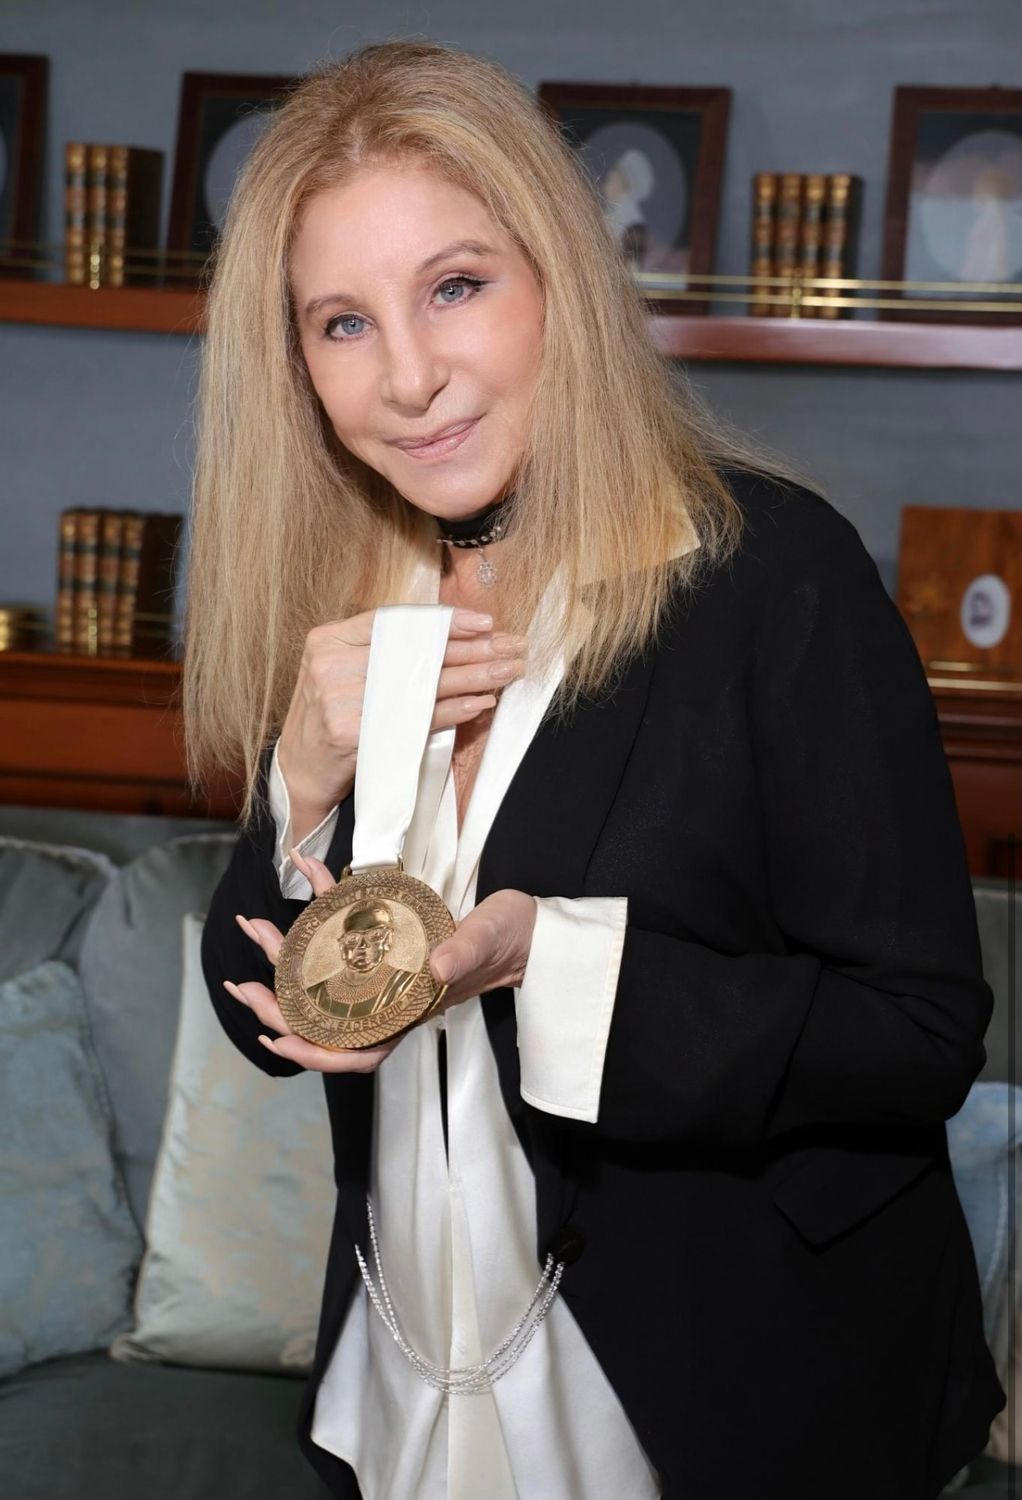 Barbra Streisand received the prestigious Justice Ruth Bader Ginsburg Woman of Leadership award during a private ceremony in Malibu, California on July 1, 2023.